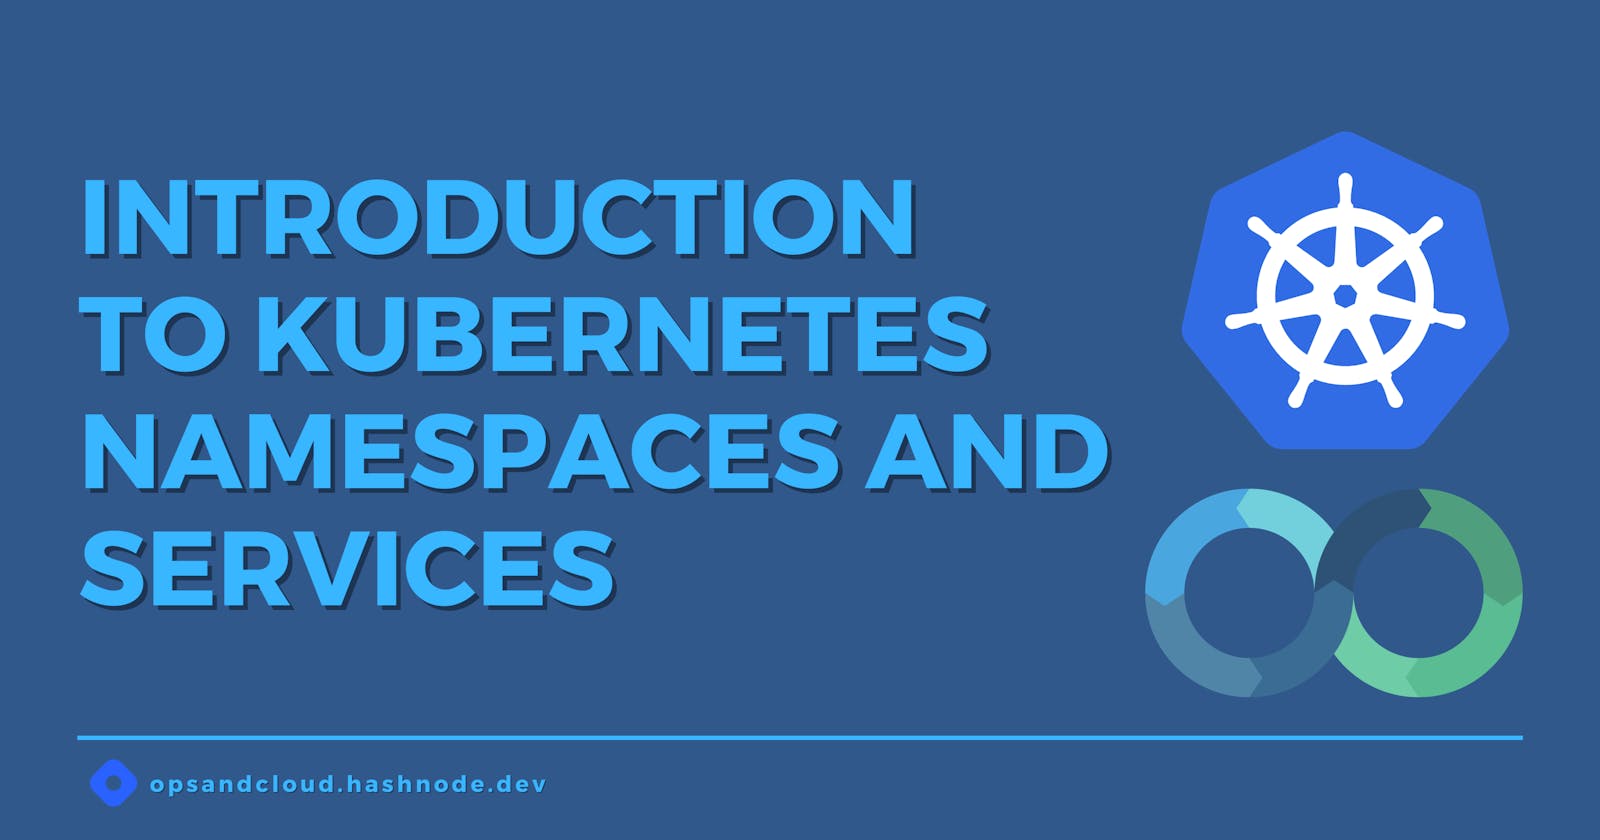 Day 33: Introduction to Kubernetes Namespaces and Services for Beginners